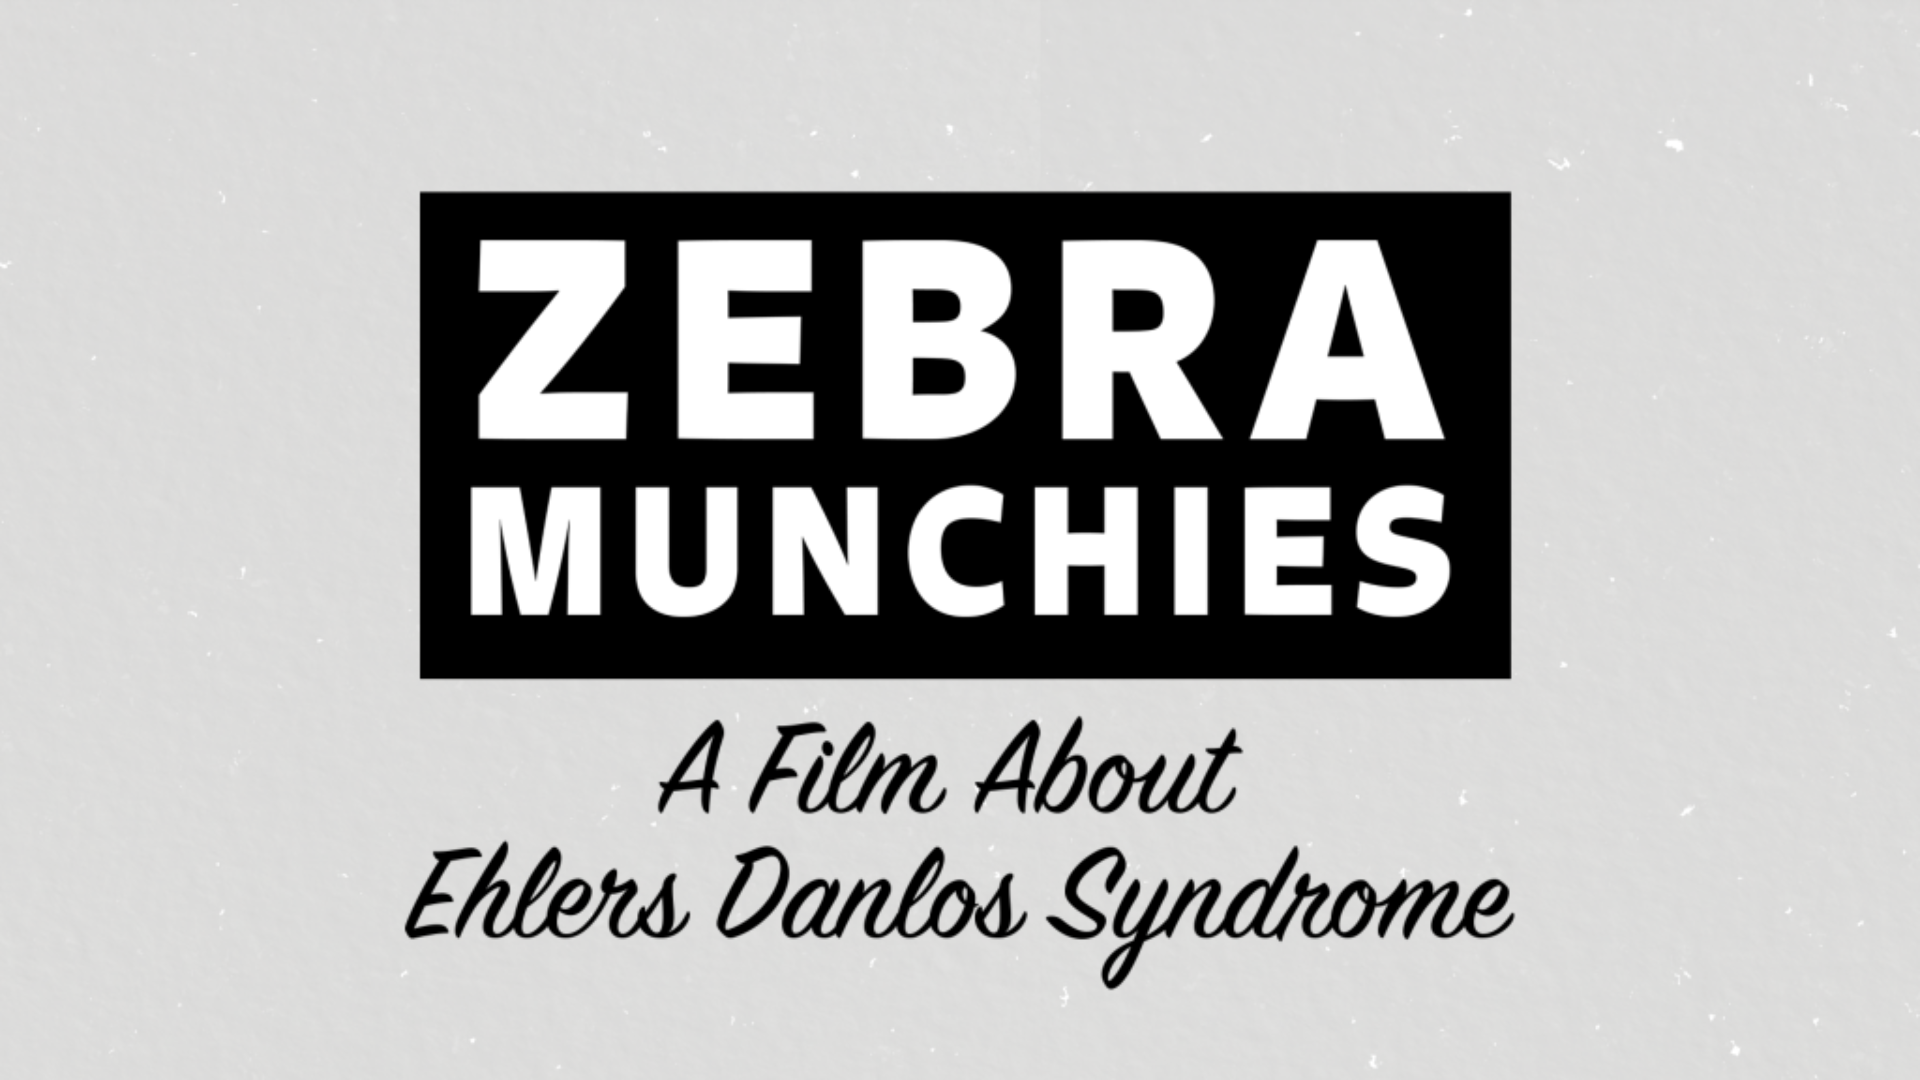 Zebra Munchies: A Film about Ehlers Danlos Syndrome